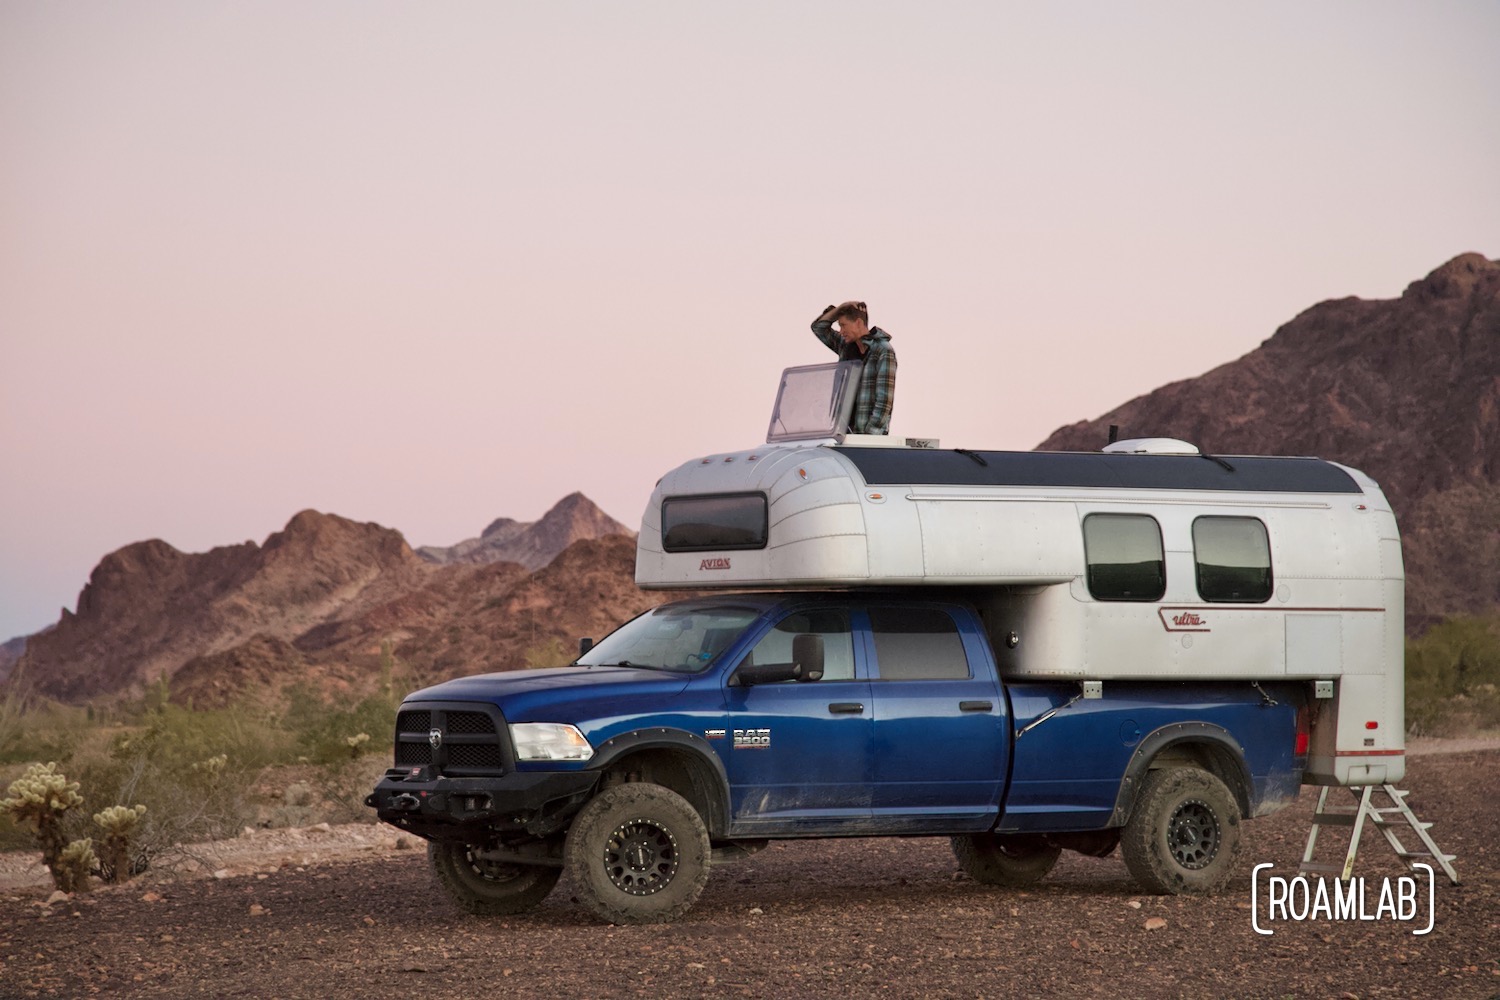 Man popping out of the roof hatch of a 1970 Avion C11 truck camper at dawn in Kofa Wilderness Refuge.